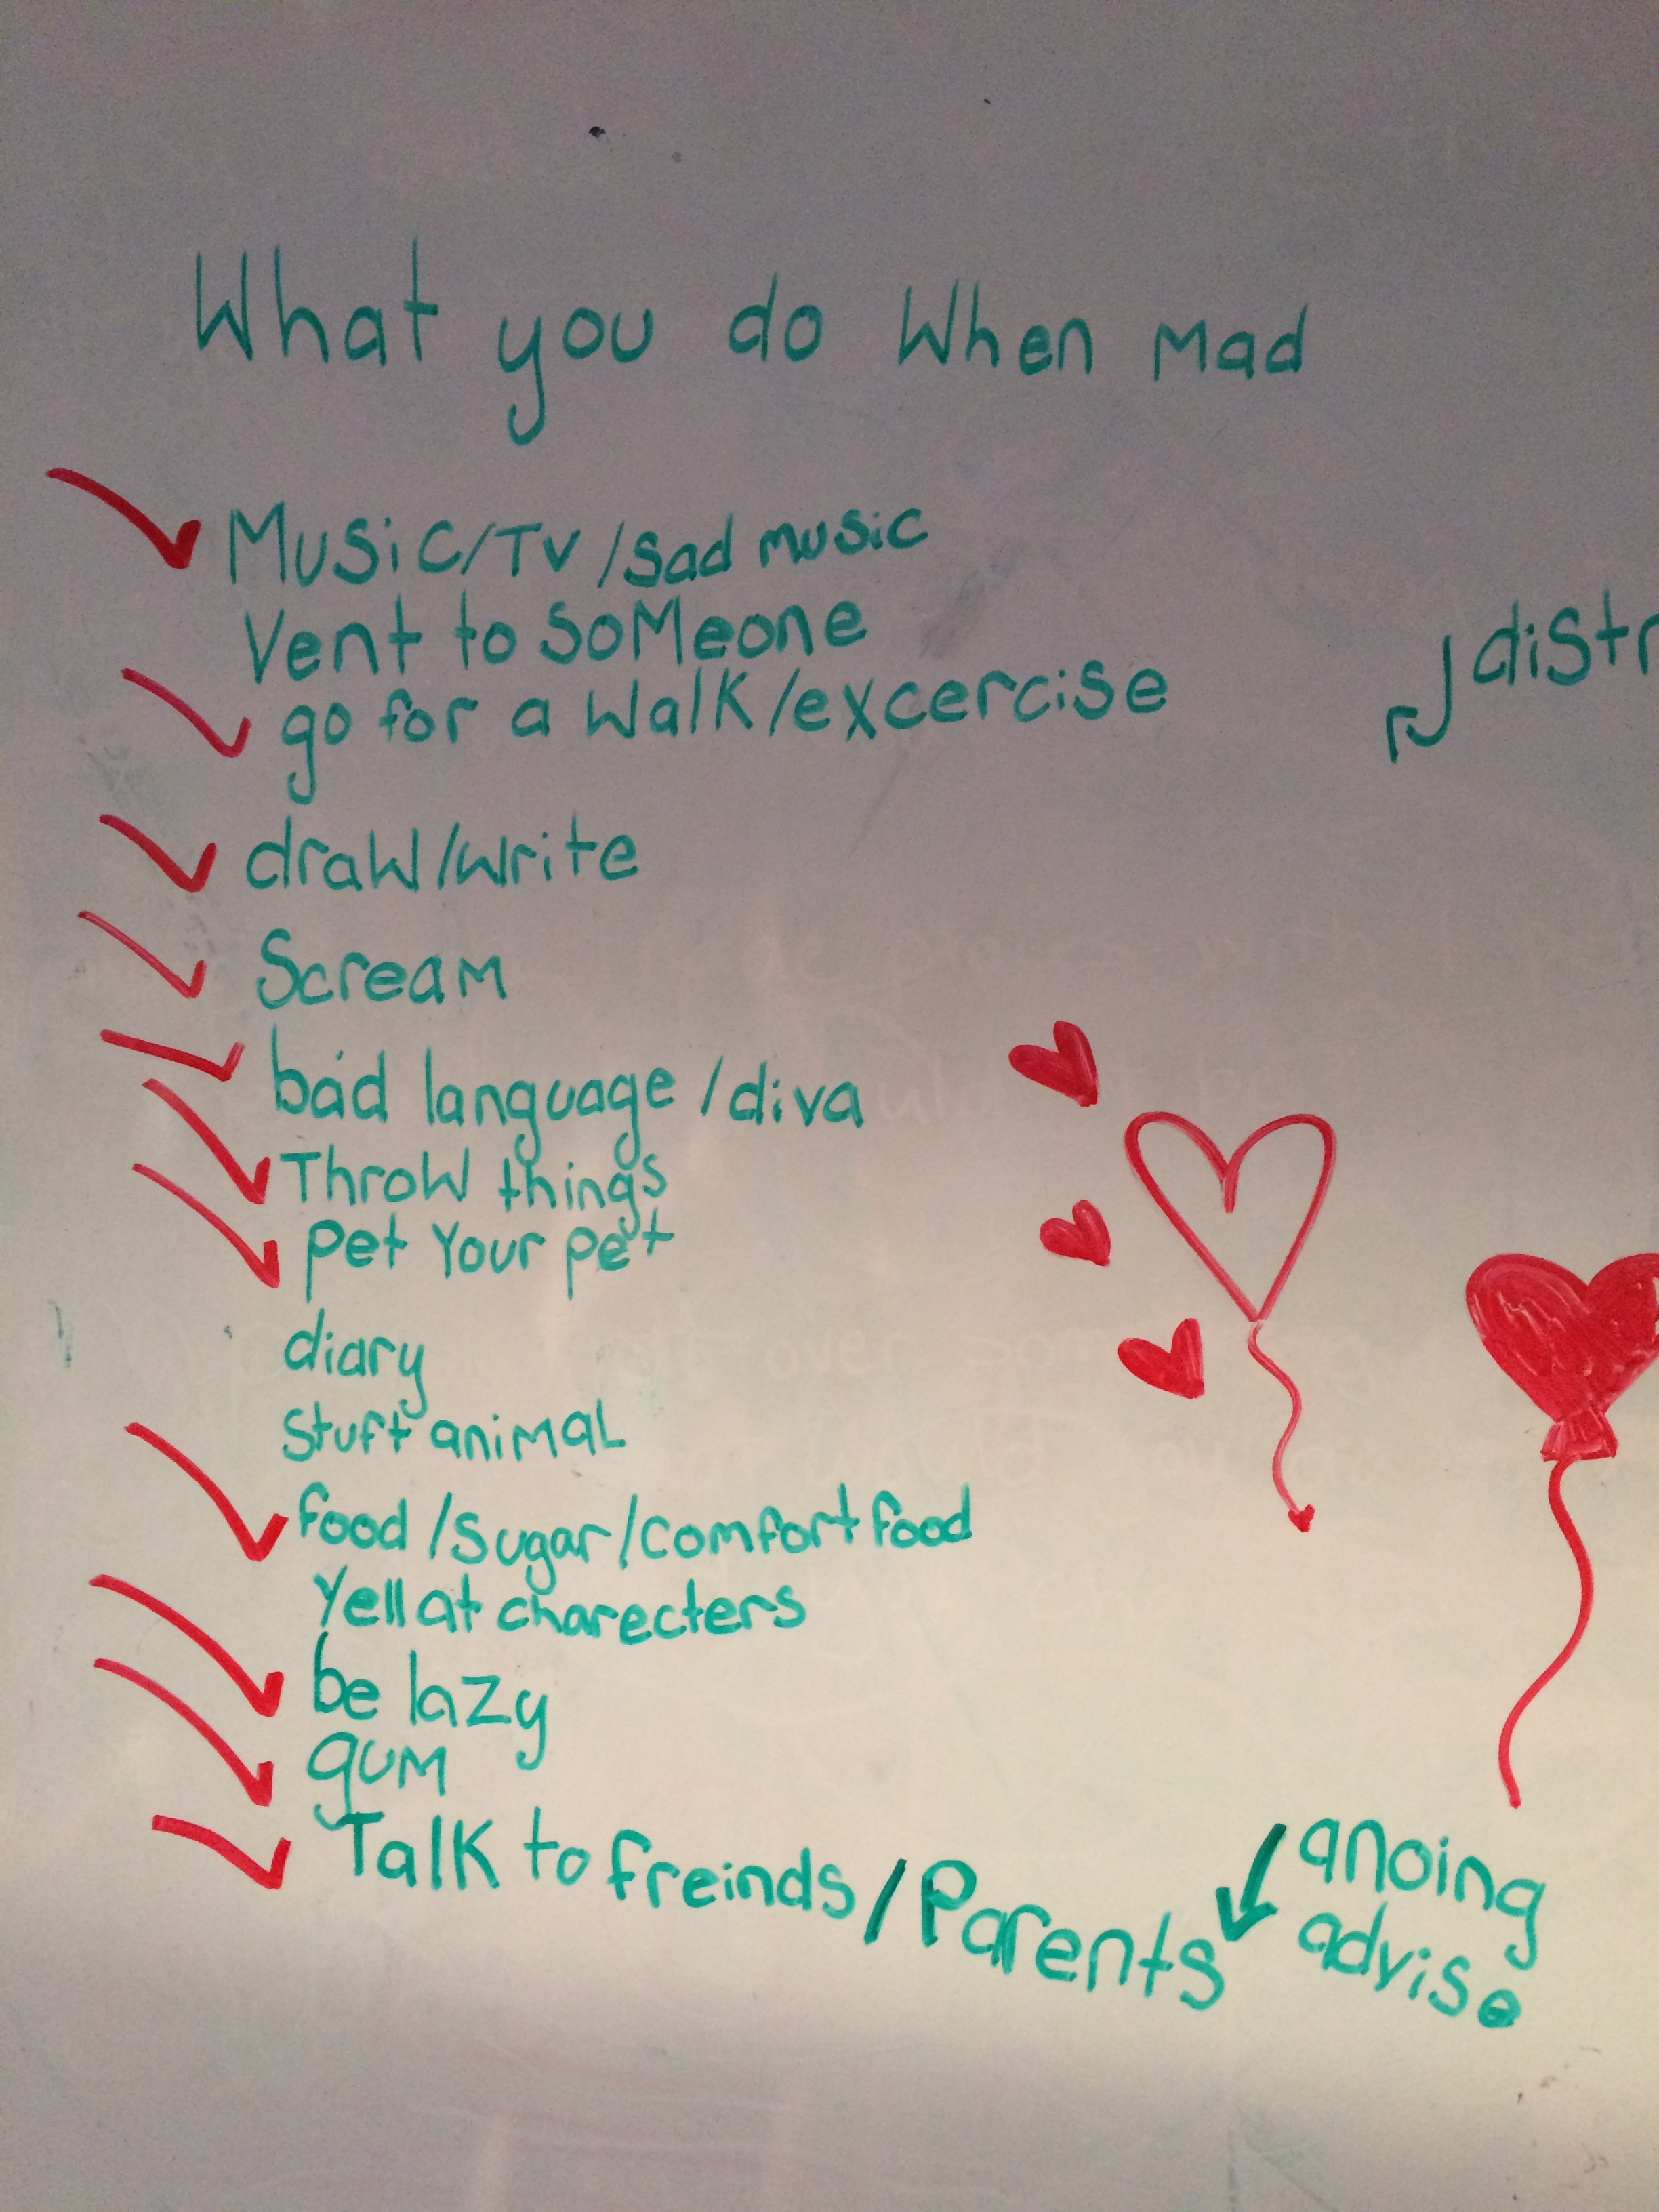 List middle school girls came up with of what to do when you are mad